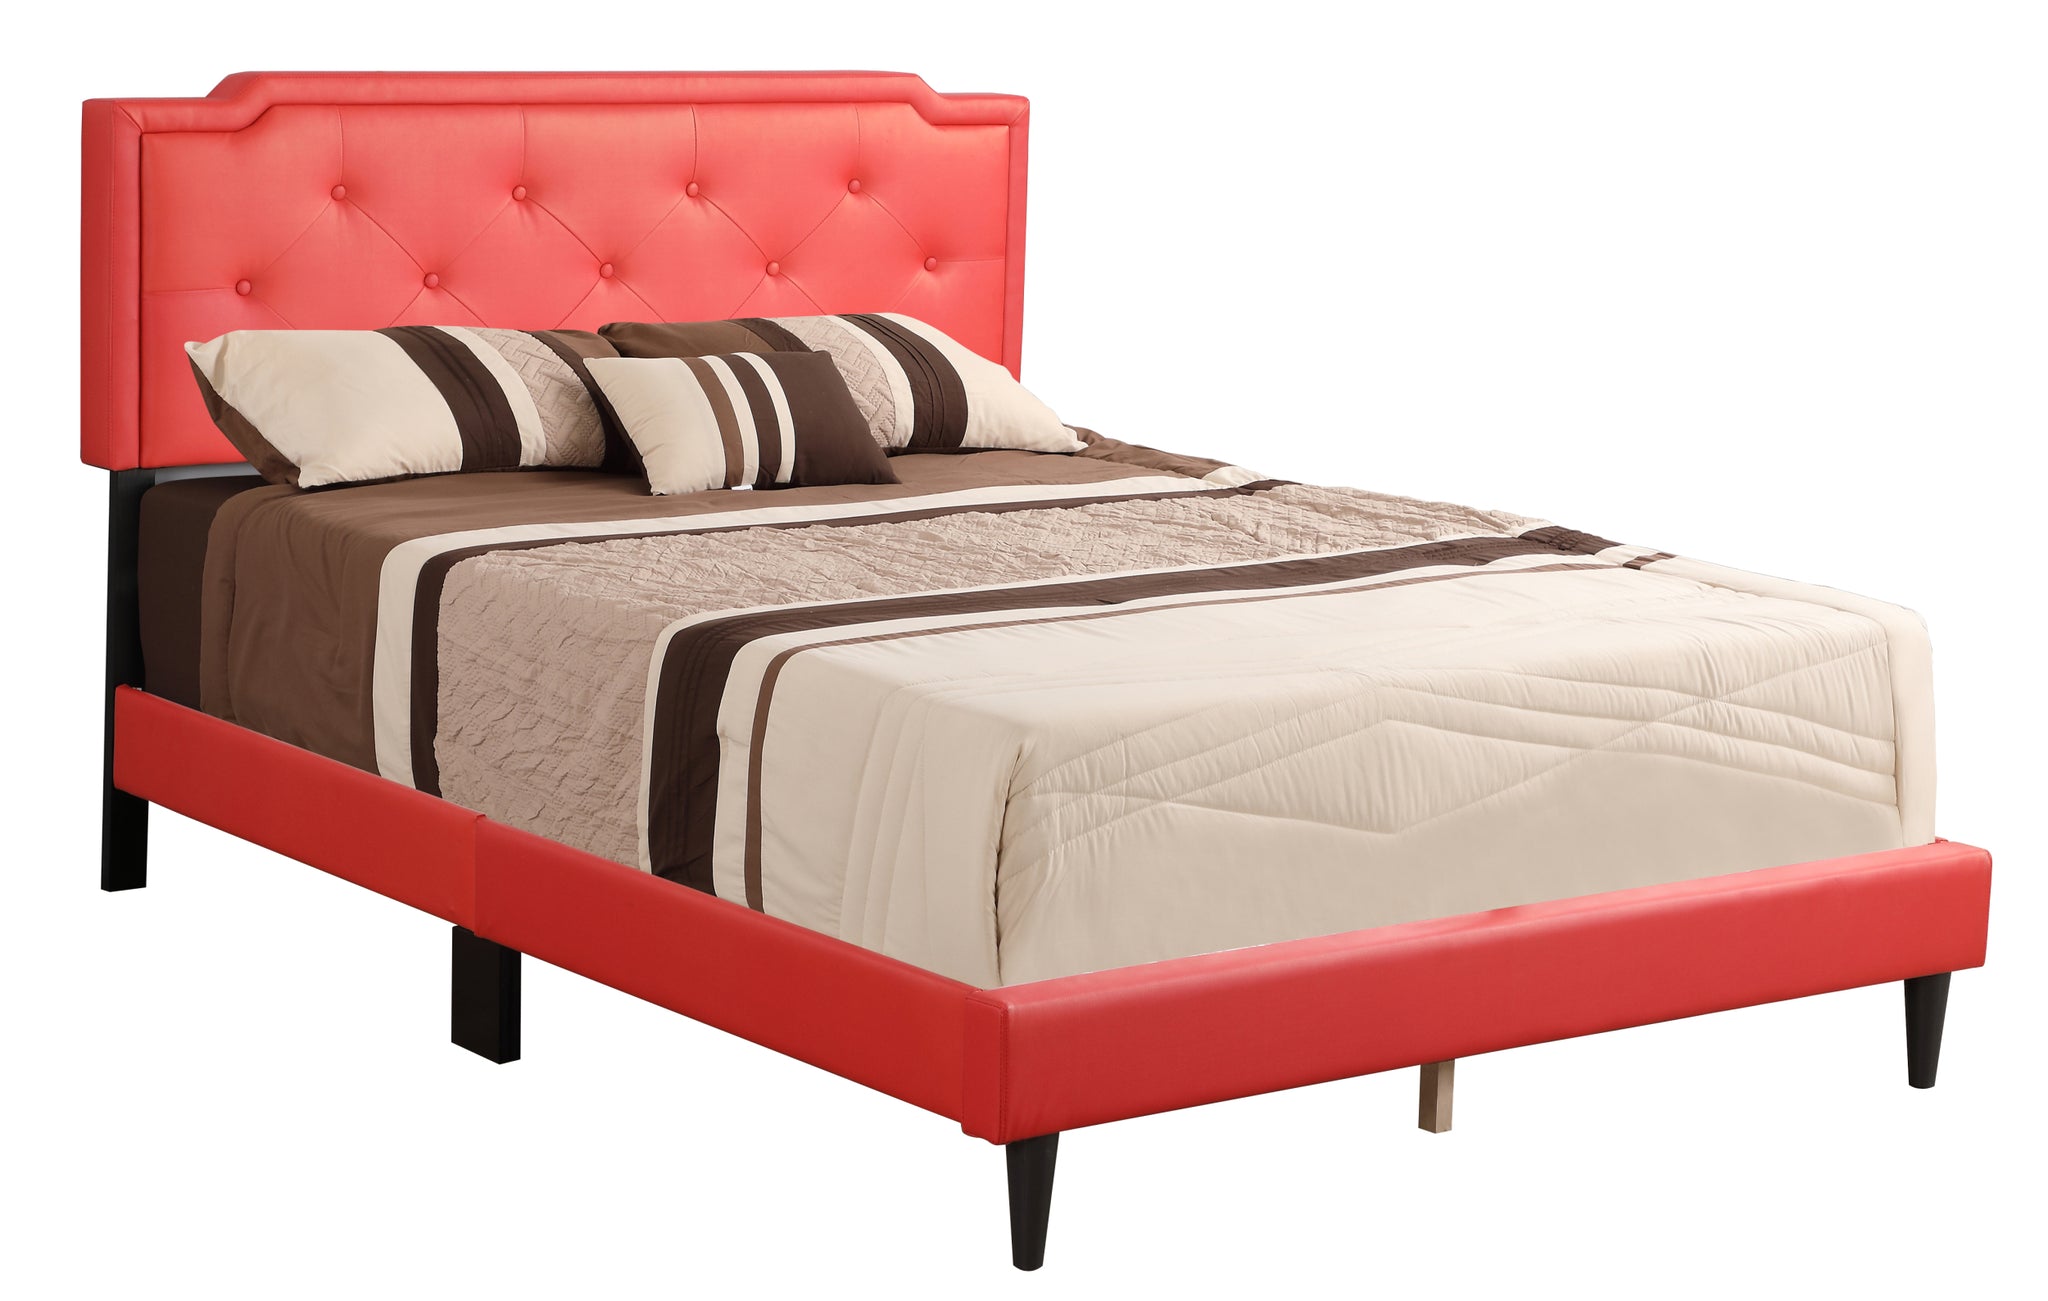 Deb G1117 QB UP Queen Bed All In One red-foam-pu